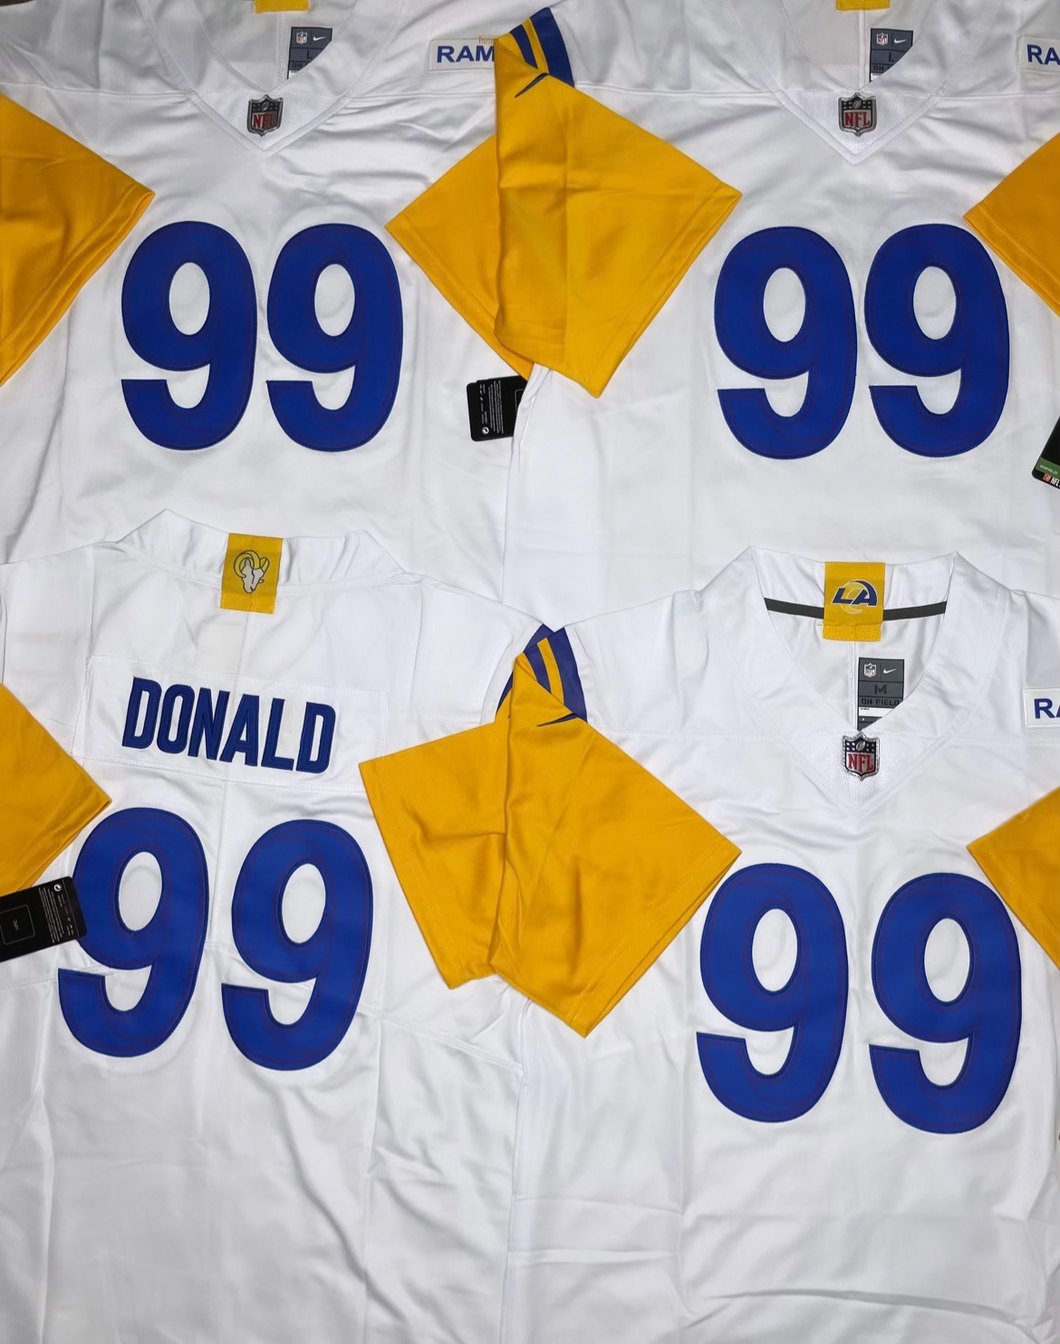 MENS L.A RAMS AARON DONALD #99 WHITE JERSEY